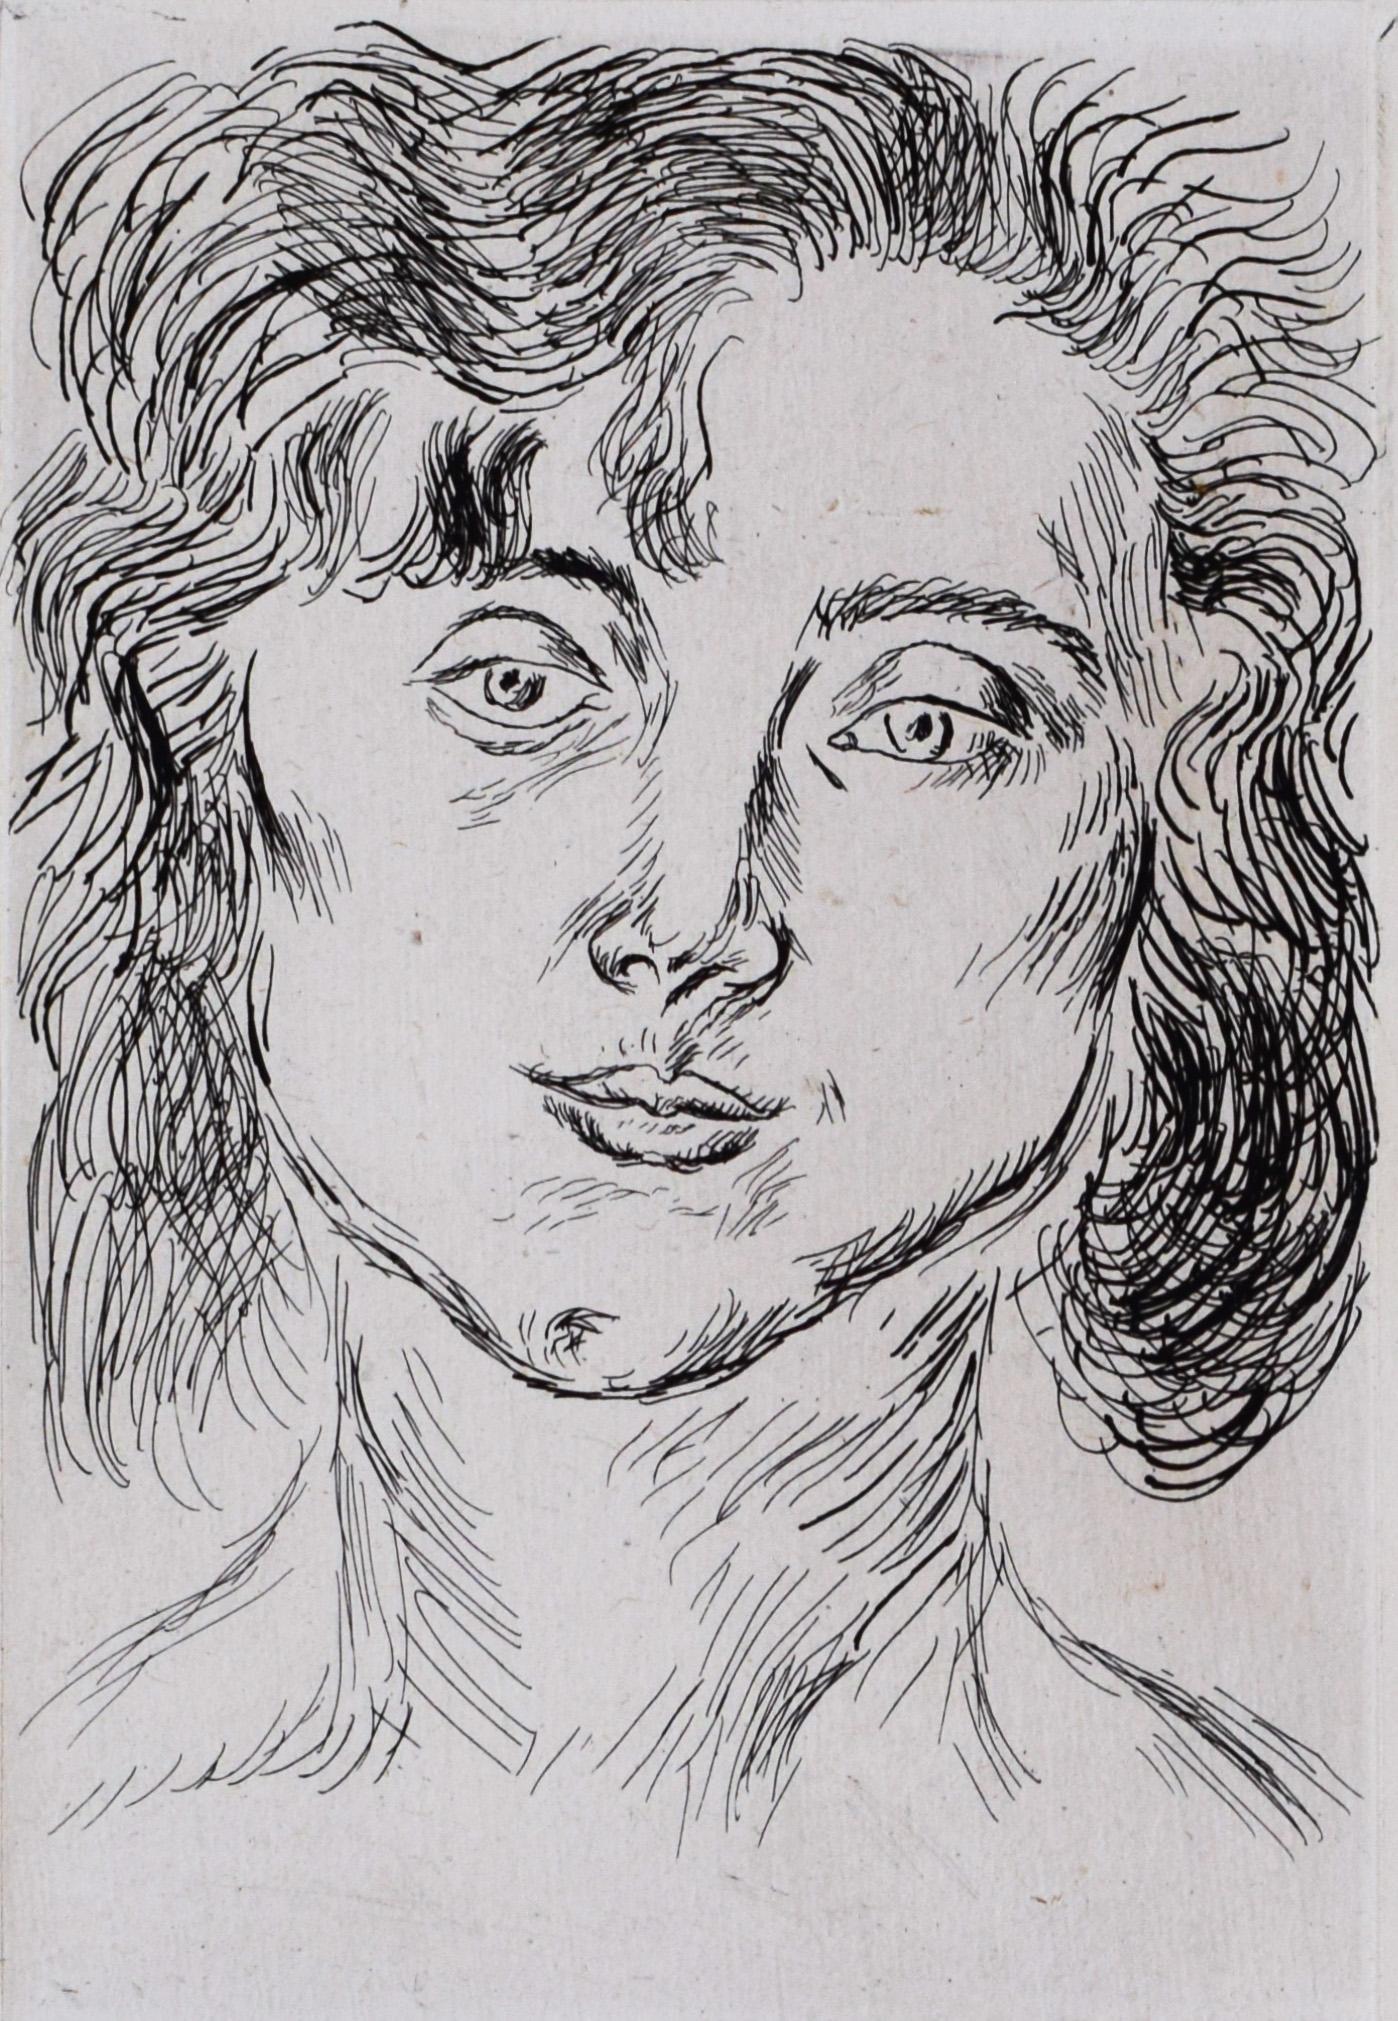 Frontispiece, from: Fifty Drawings - French Impressionism Portrait